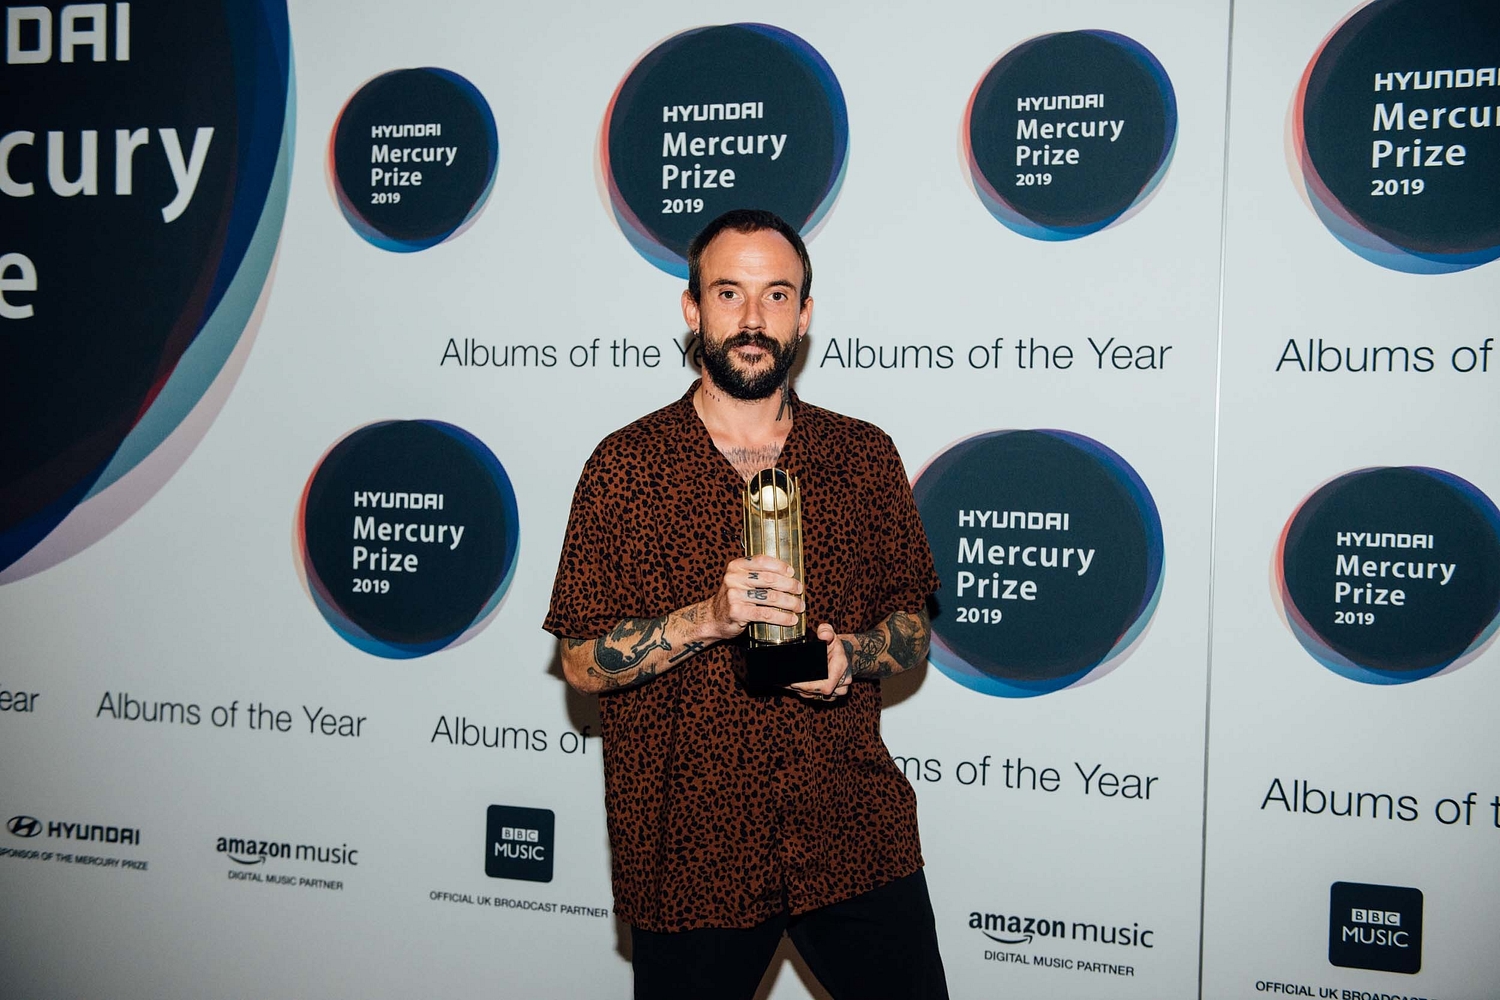 "We’re not about ego boosts, but it’s nice to celebrate the album" - IDLES talk their Hyundai Mercury Prize spot